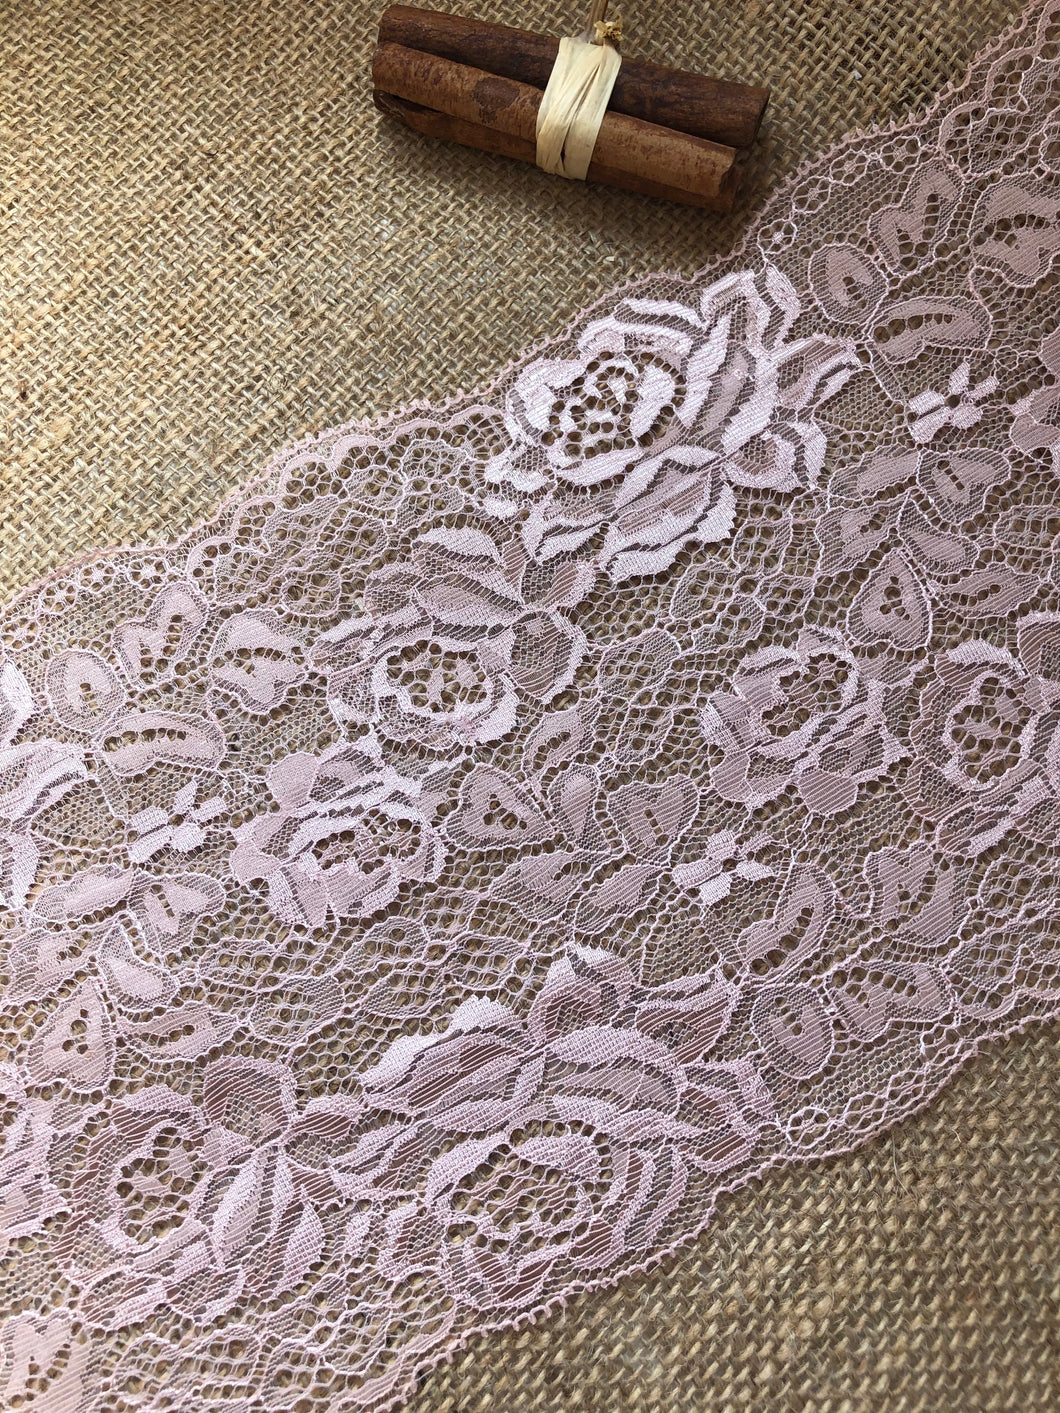 Dusky Pink Lace French 17 cm/6.75  – The Lace Co.